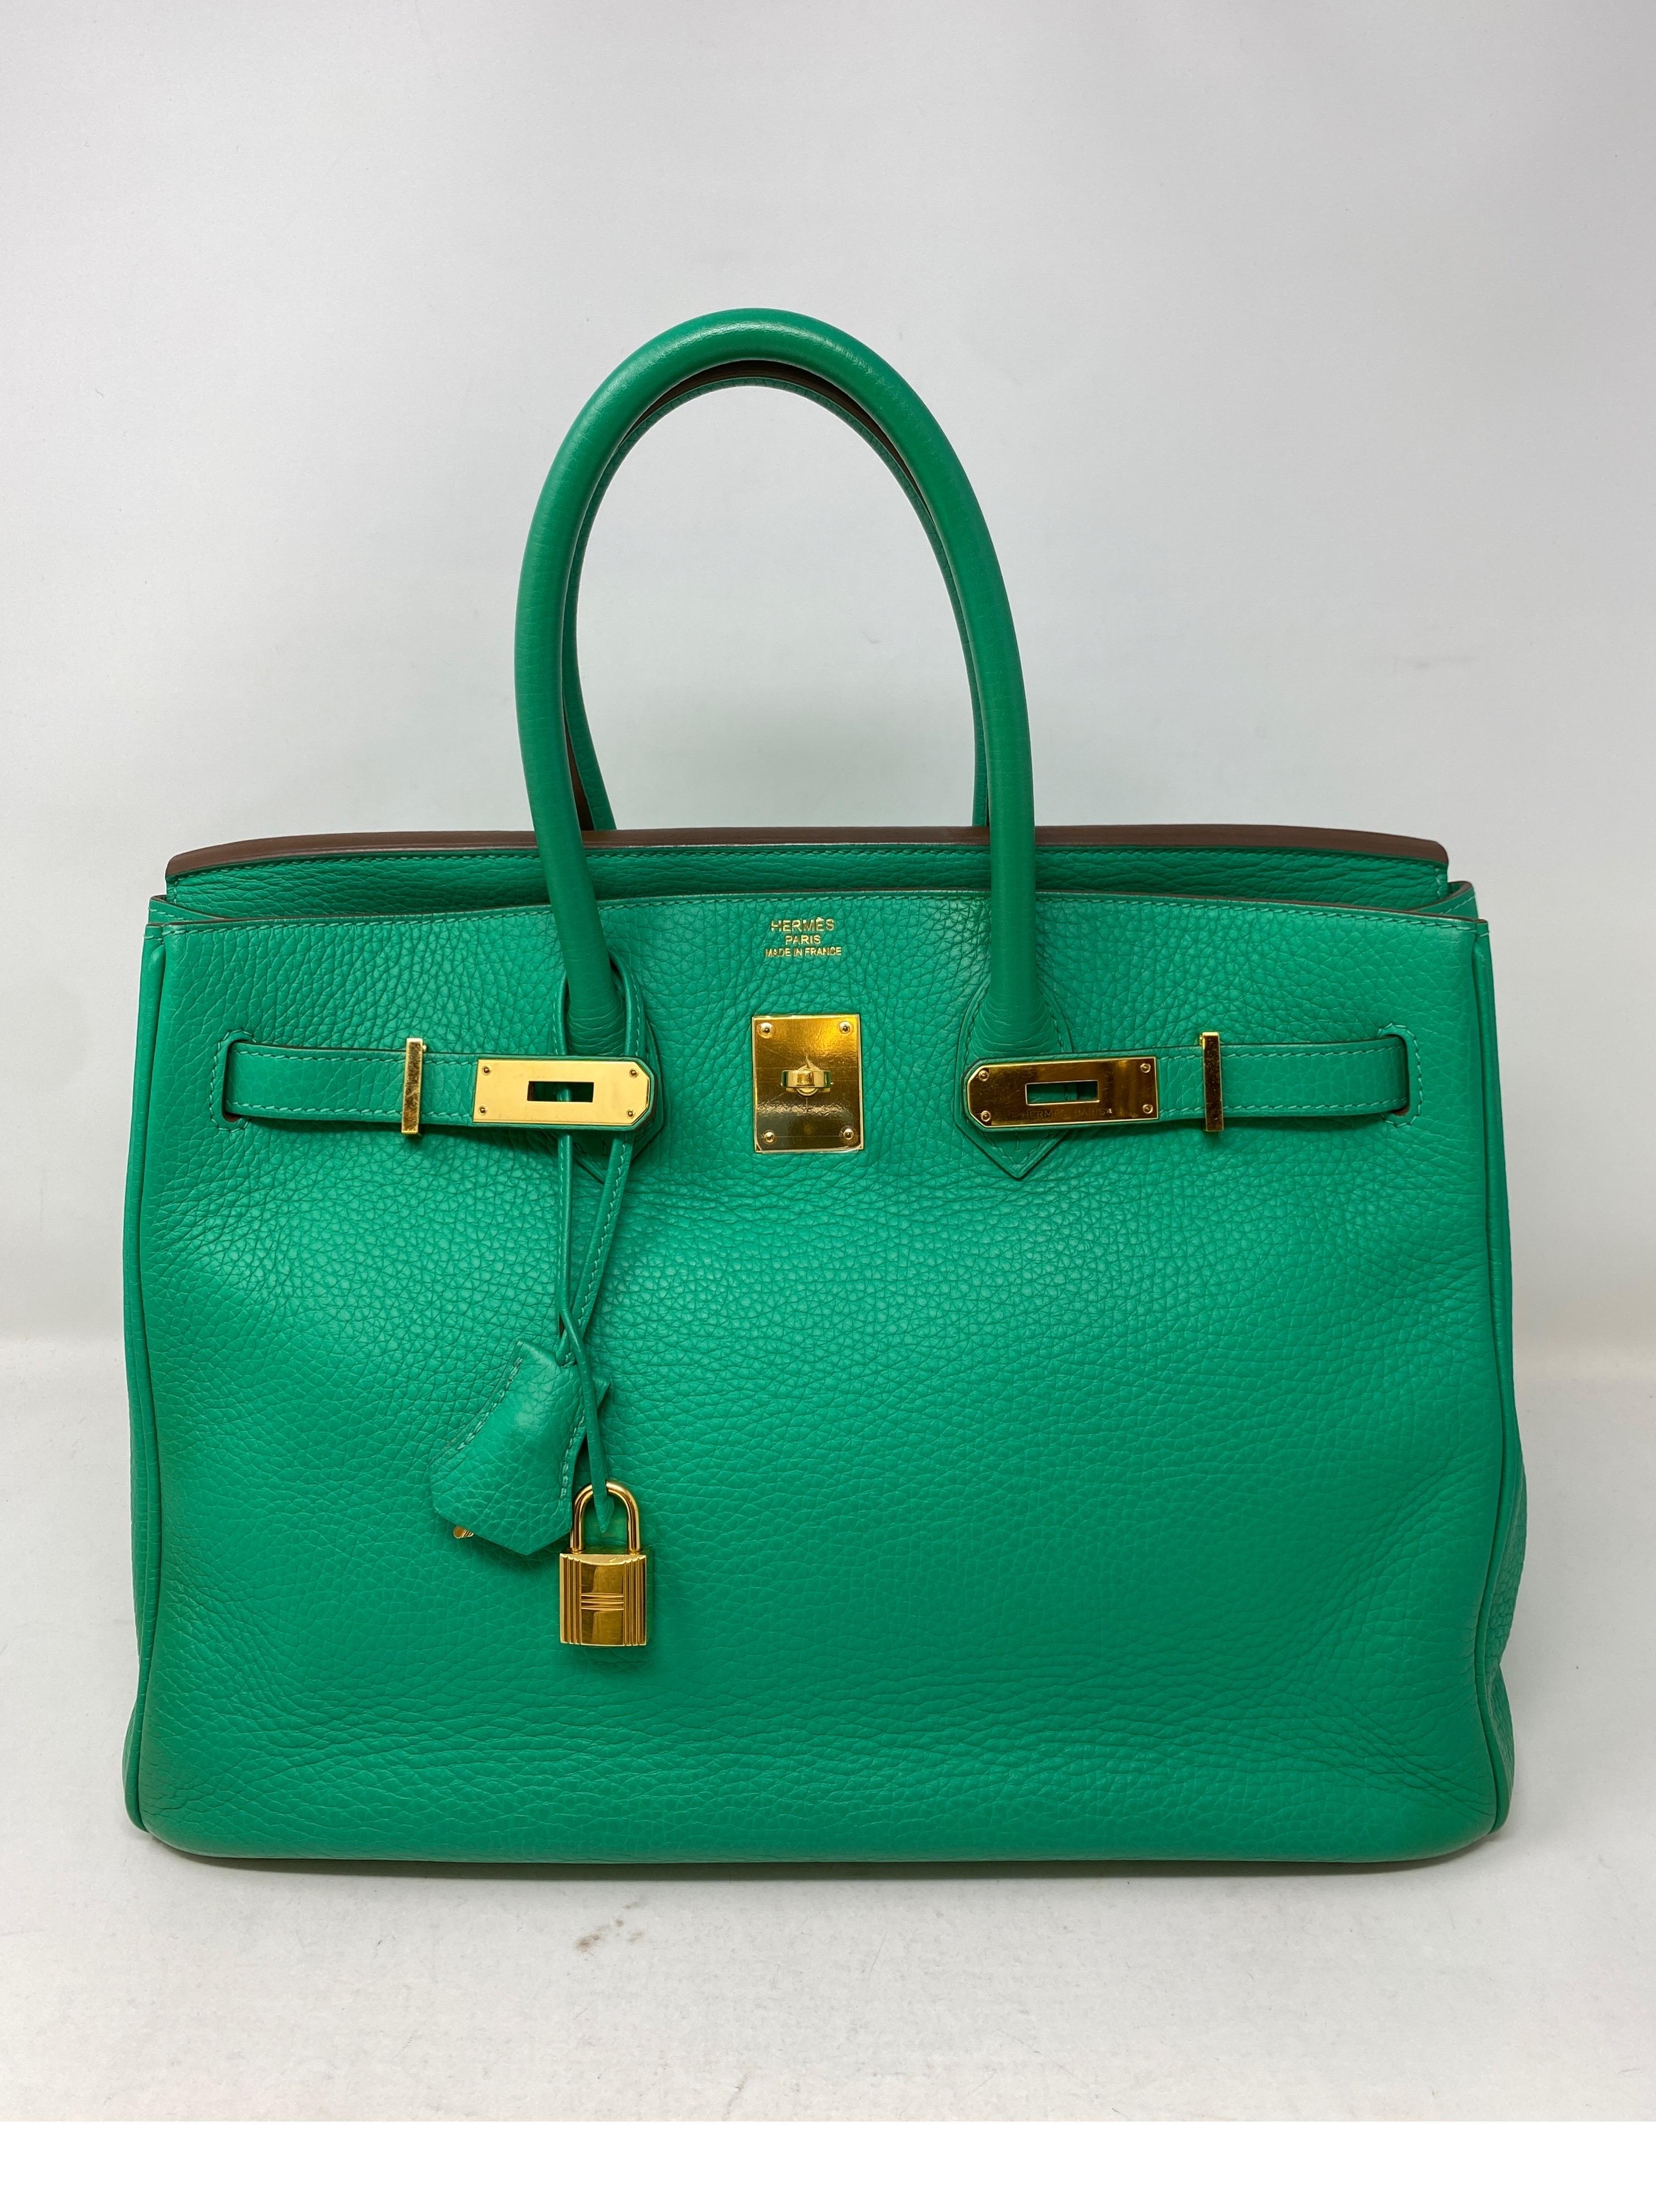 Hermes Menthe Birkin 35 Bag. Cool minty green color. Gold hardware. Collector's item. Good condition overall. Light wear on corners. Great addition for the Birkin collector. Includes clochette, lock, keys, and dust cover. Guaranteed authentic. 